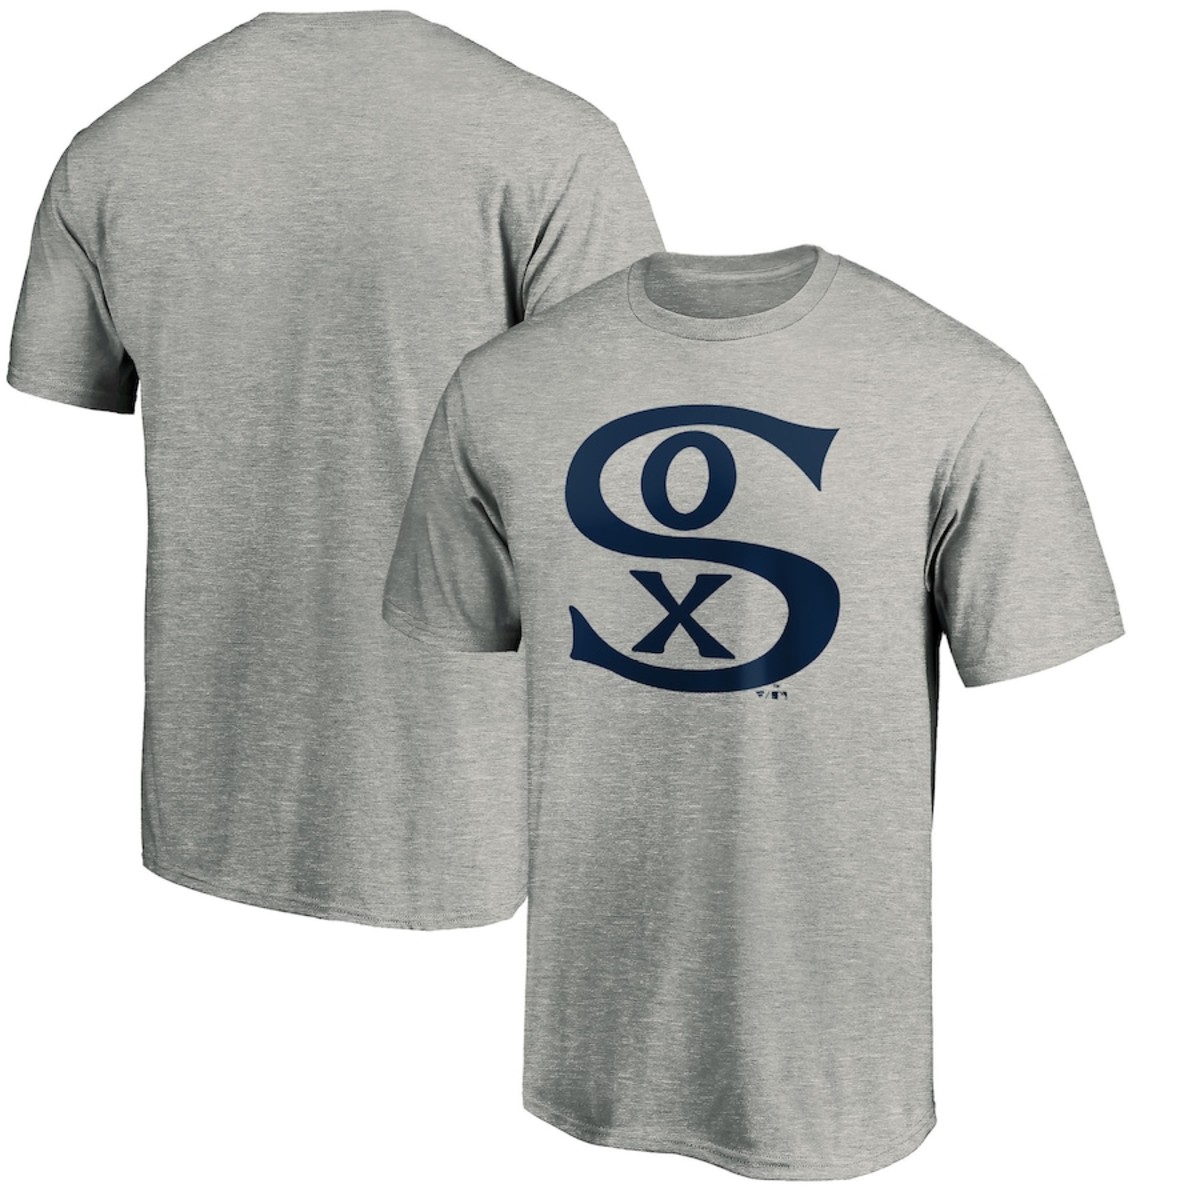 Chicago White Sox Fanatics Branded Cooperstown Collection Forbes Team T-Shirt - Heathered Gray